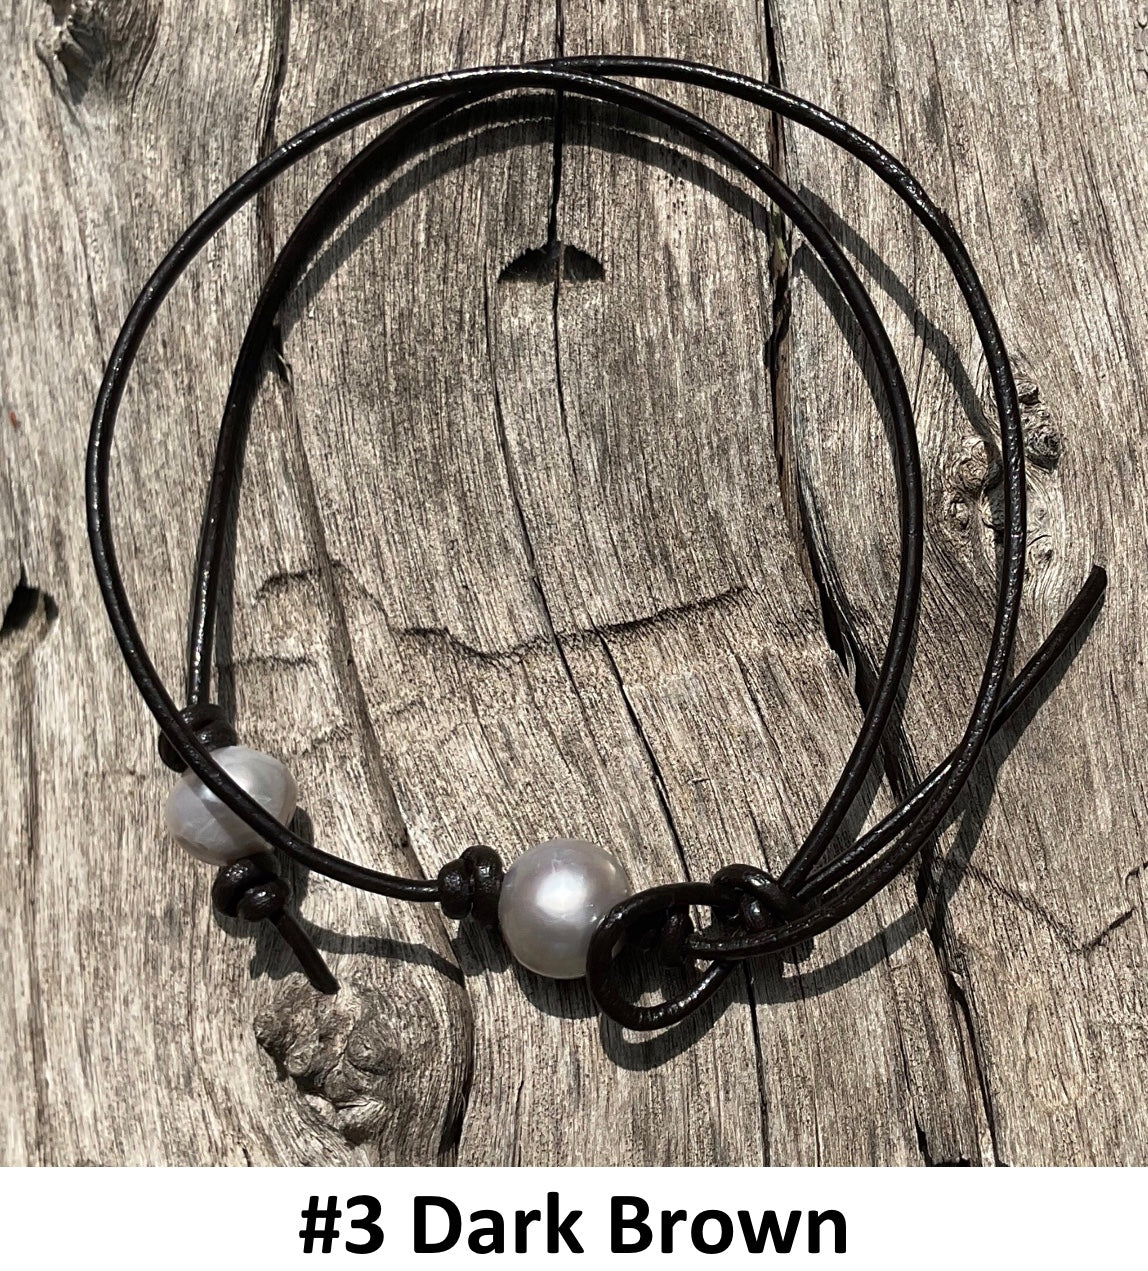 Single Gray Pearl Necklace,, #3 Dark Brown Leather Cord